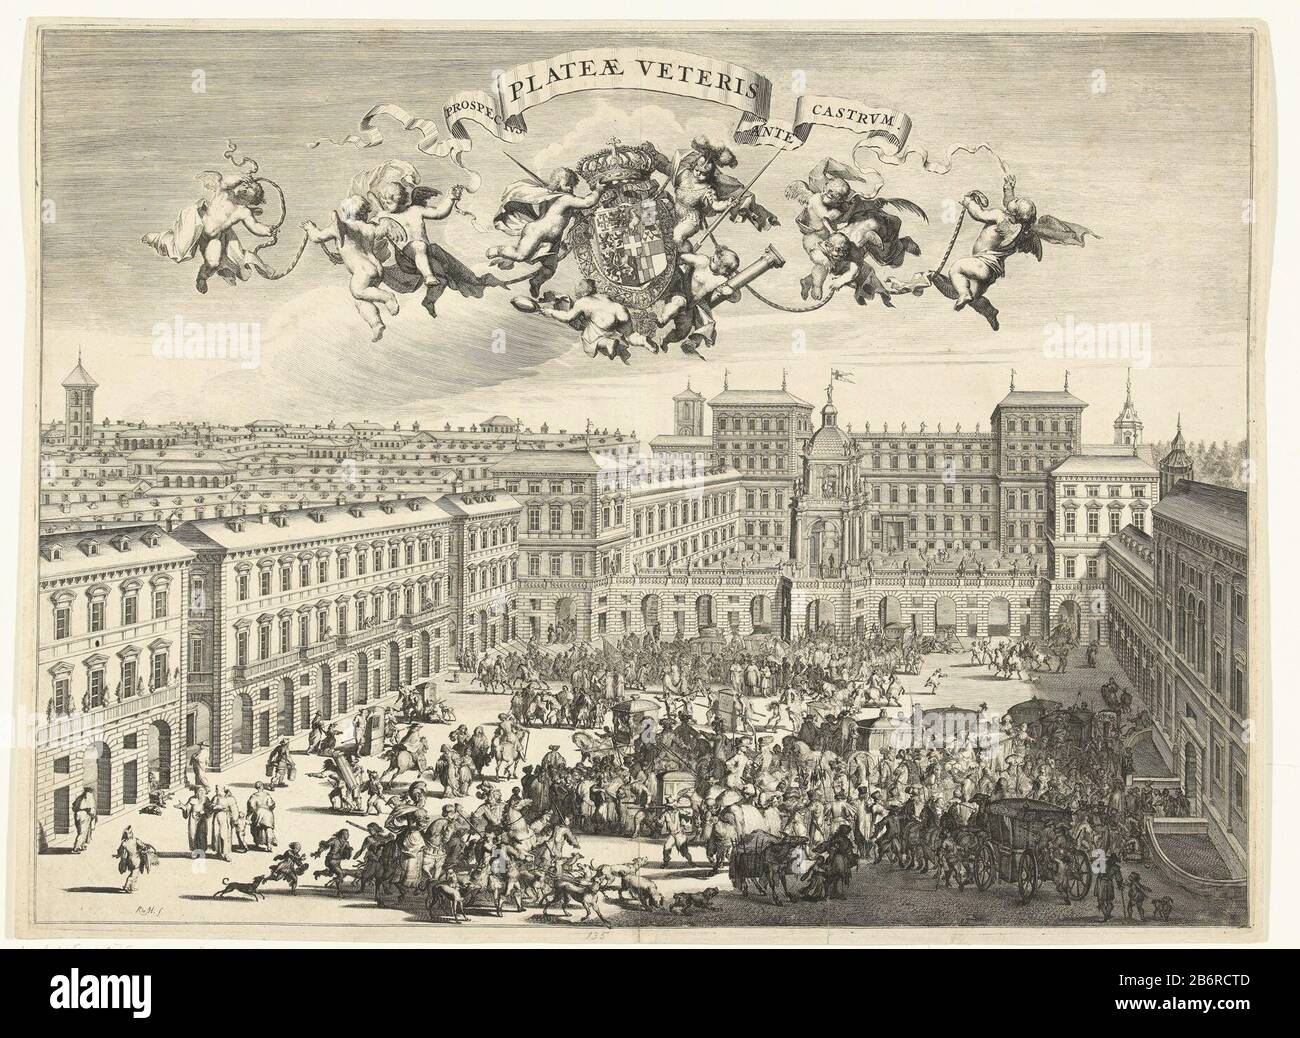 Gezicht op het Piazza Castello in Turijn Prospectus plateae veteris ante castrum (titel op object) View of the Piazza Castello in Turin. In the foreground, the square packed with people and carriages. In the background a procession which passes under an arch towards a square behind it. Airborne putti carrying a heraldic weapon. In addition, a band bearing the titel. Manufacturer : print maker: Romeyn the Hooghe (indicated on object), at its design: Romeyn the Hooghe Place manufacture: The Netherlands Date: 1681 - 1682 Physical characteristics: etching material: paper Technique: etching dimensi Stock Photo